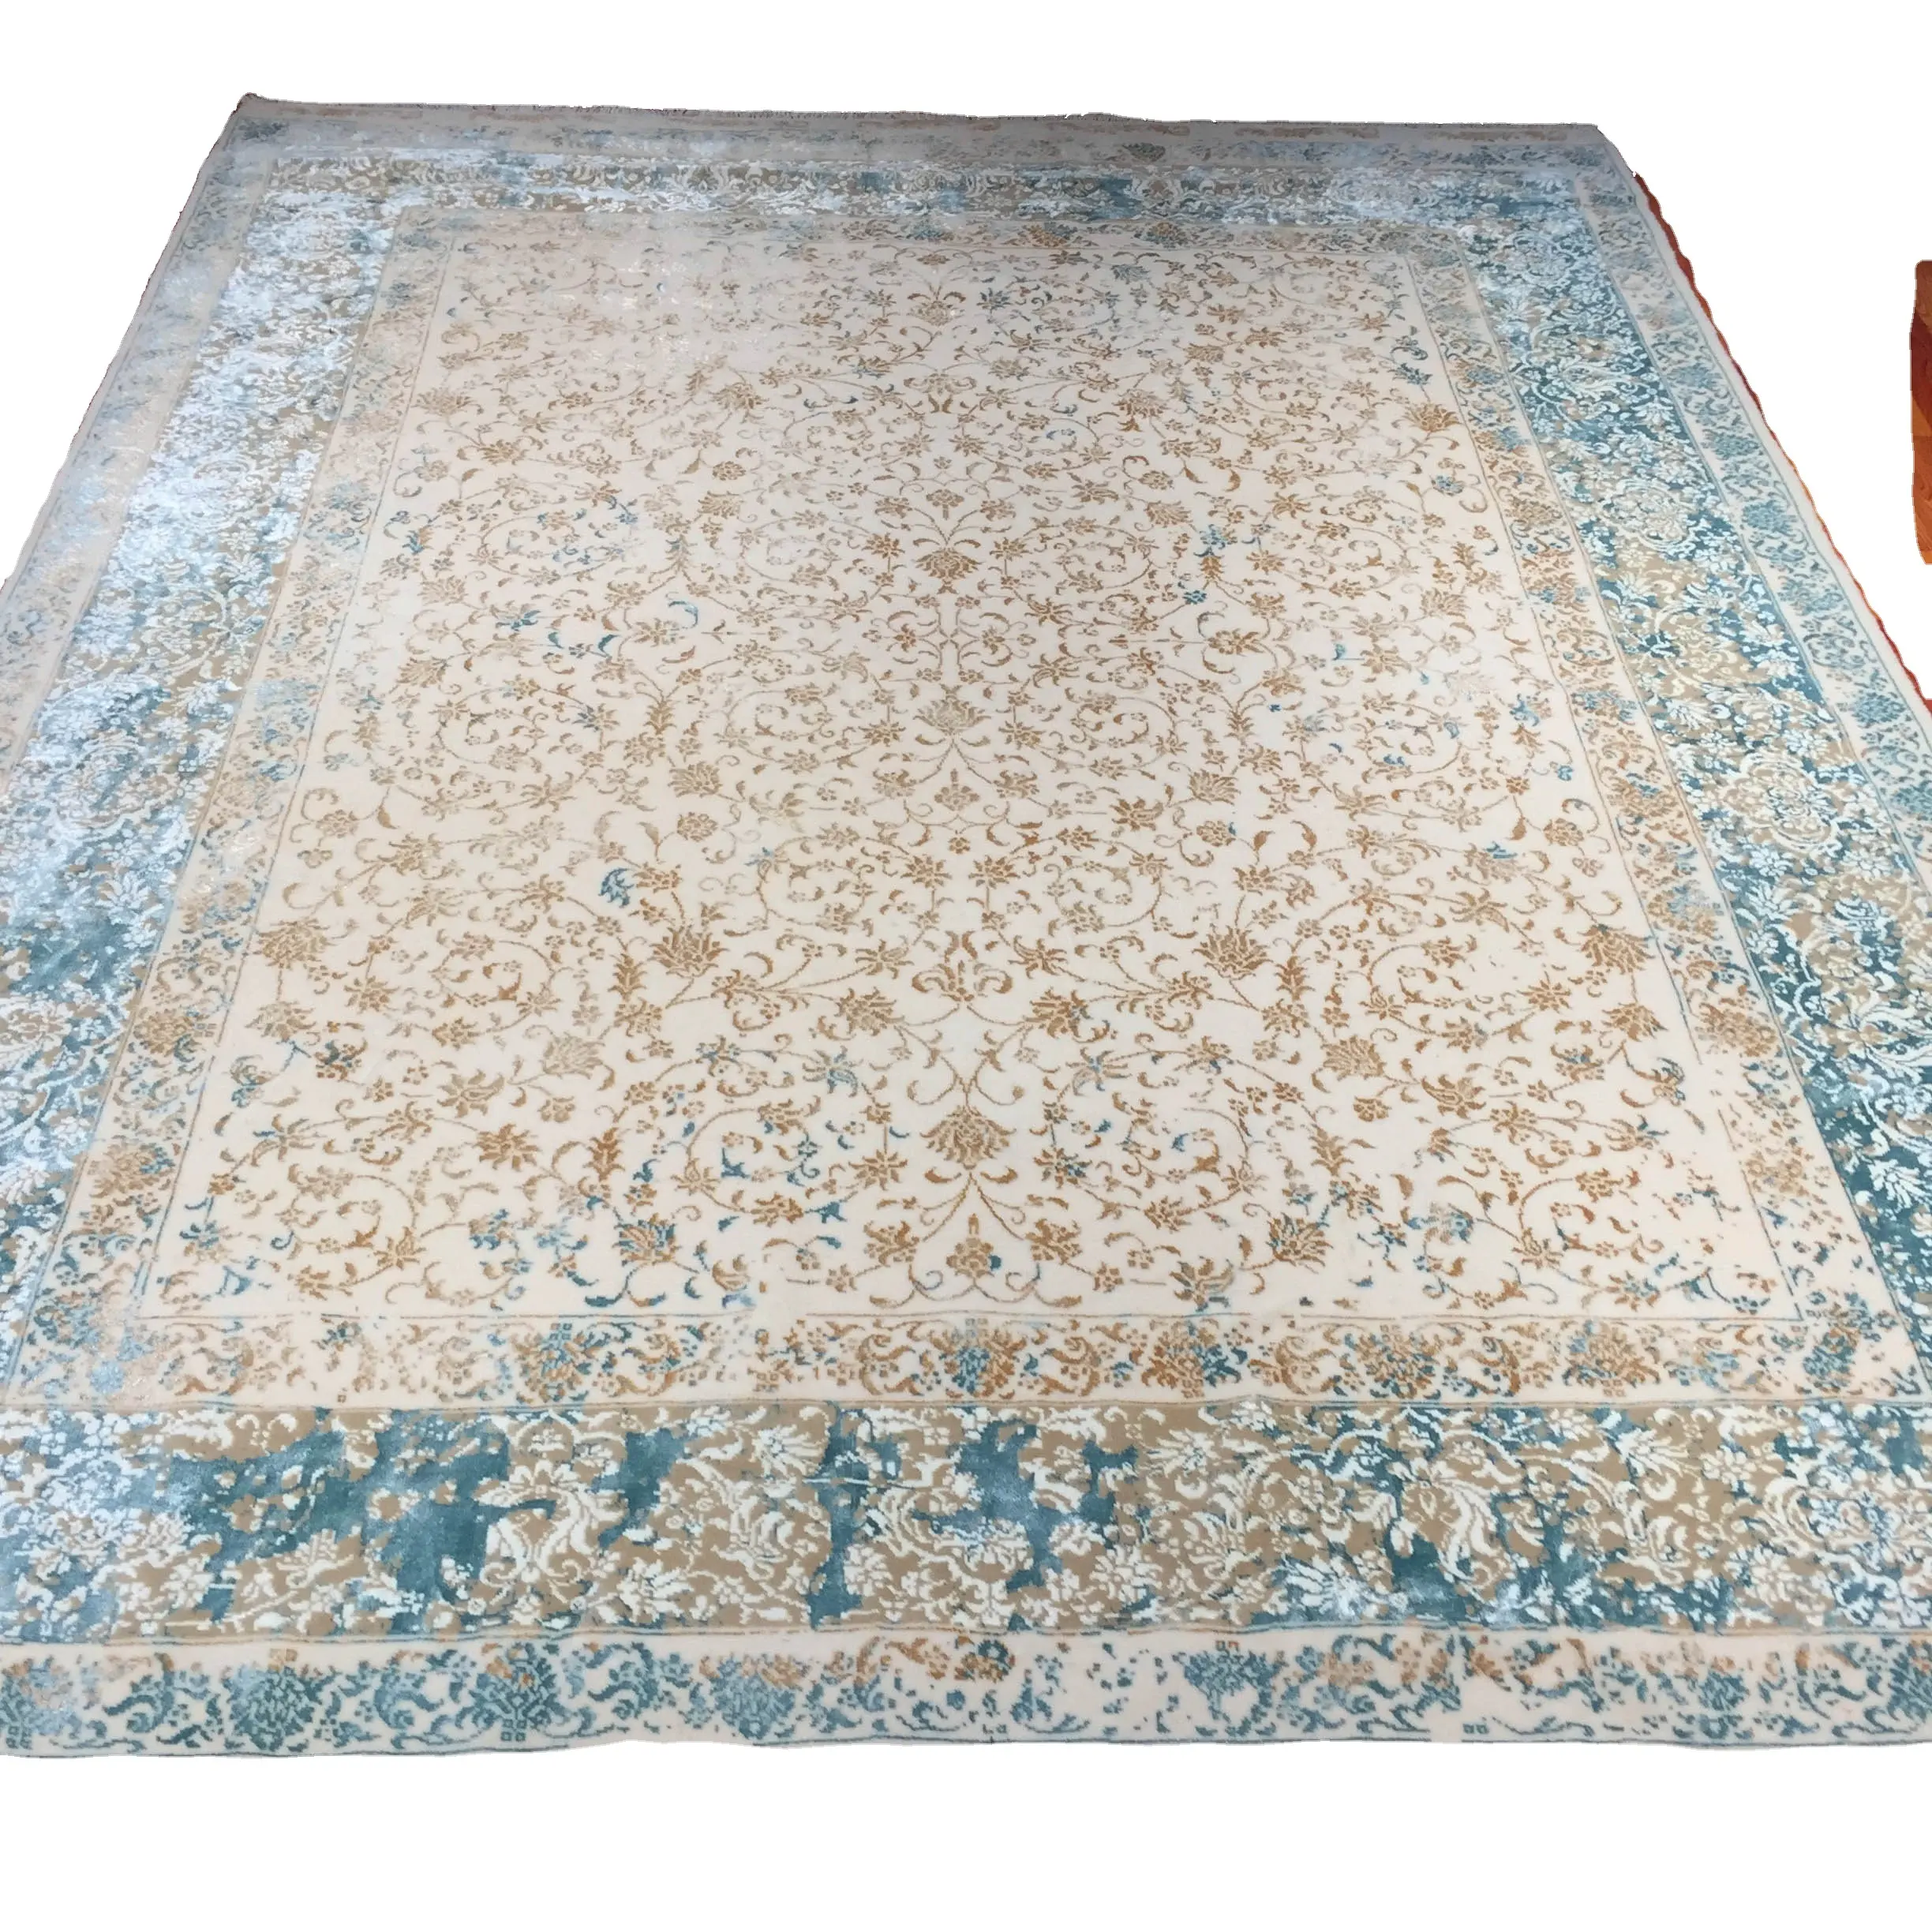 250x320cm factory price turkish handmade hand knotted persian 100% wool indoor hotel office area carpets rugs